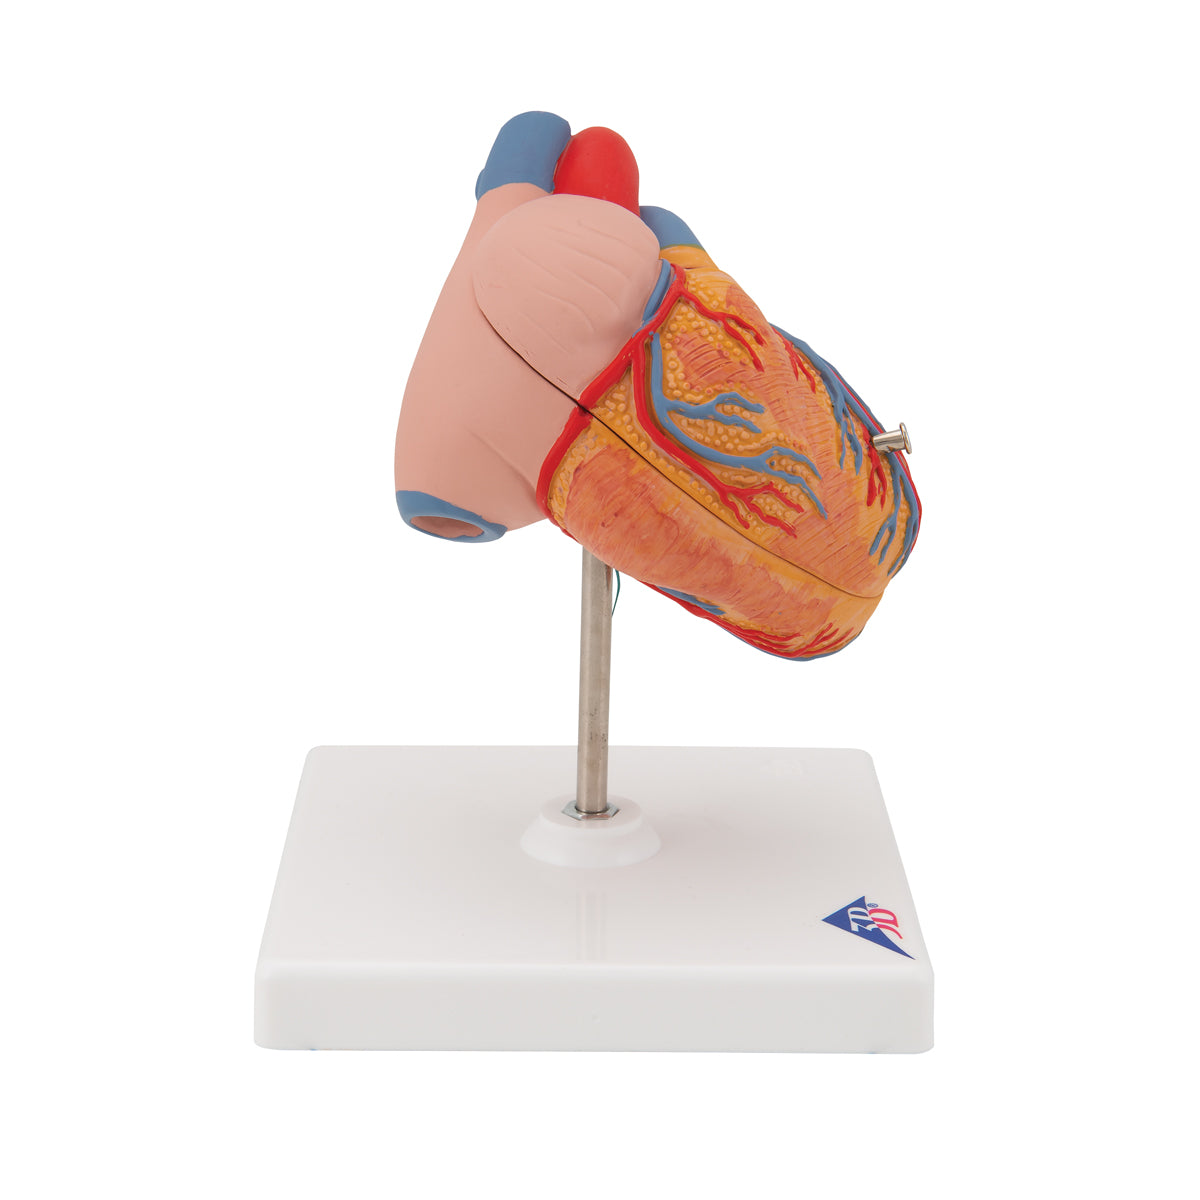 Diminished heart model with left ventricular hypertrophy and strain